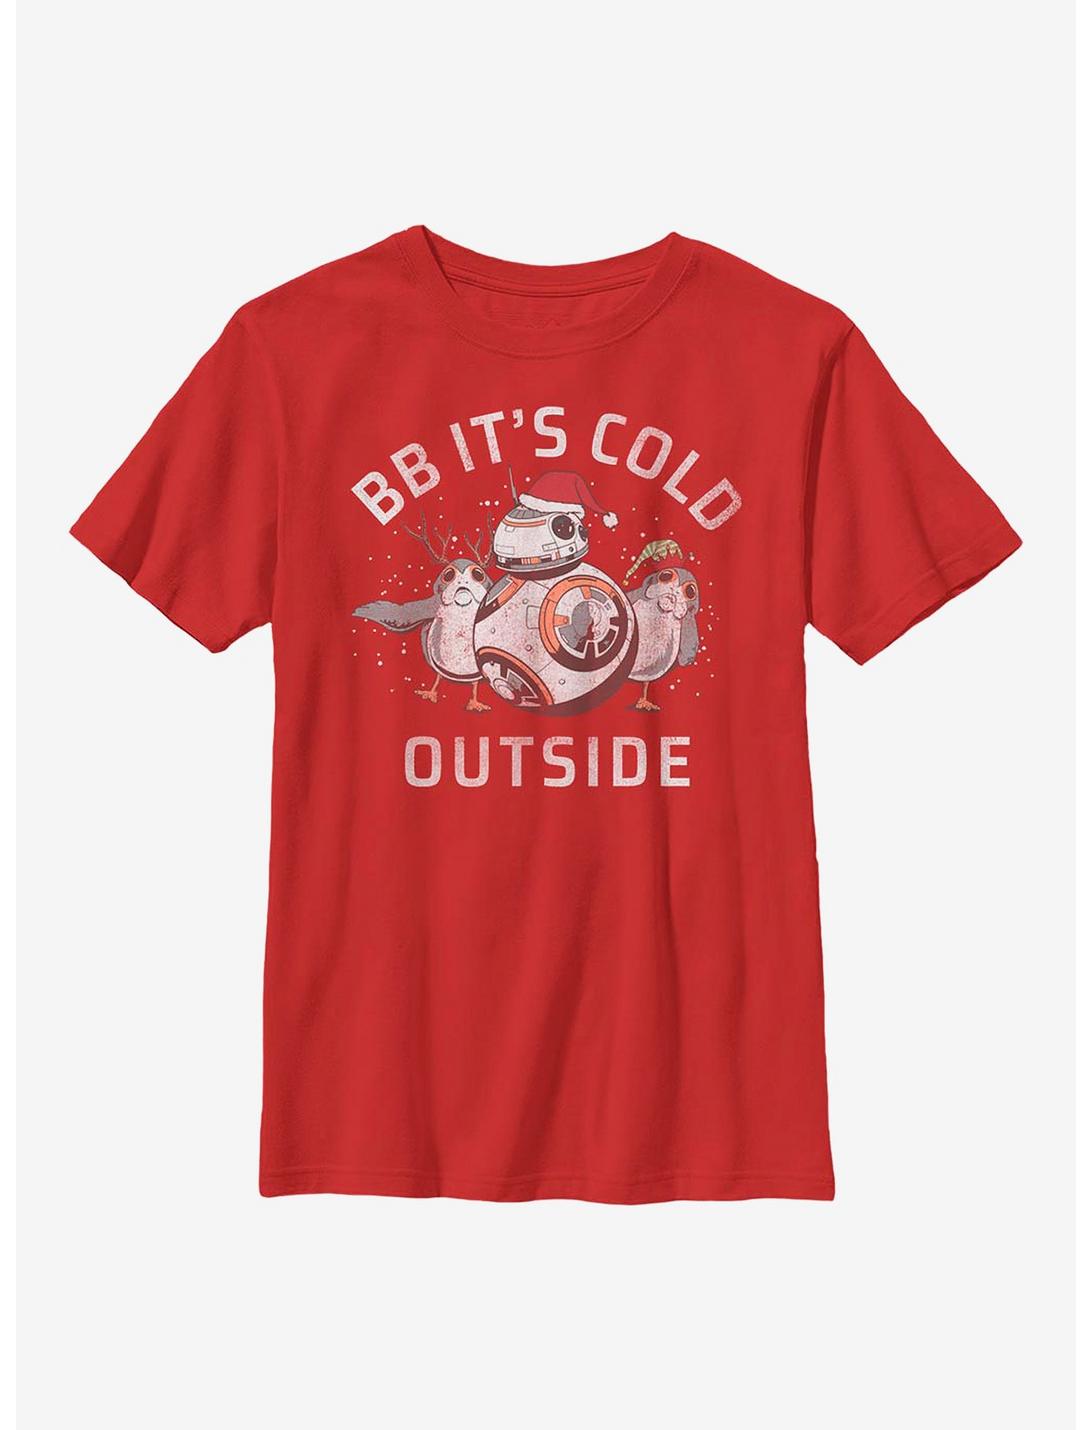 Star Wars Episode VIII: The Last Jedi BB-8 Festive Cold Youth T-Shirt, RED, hi-res